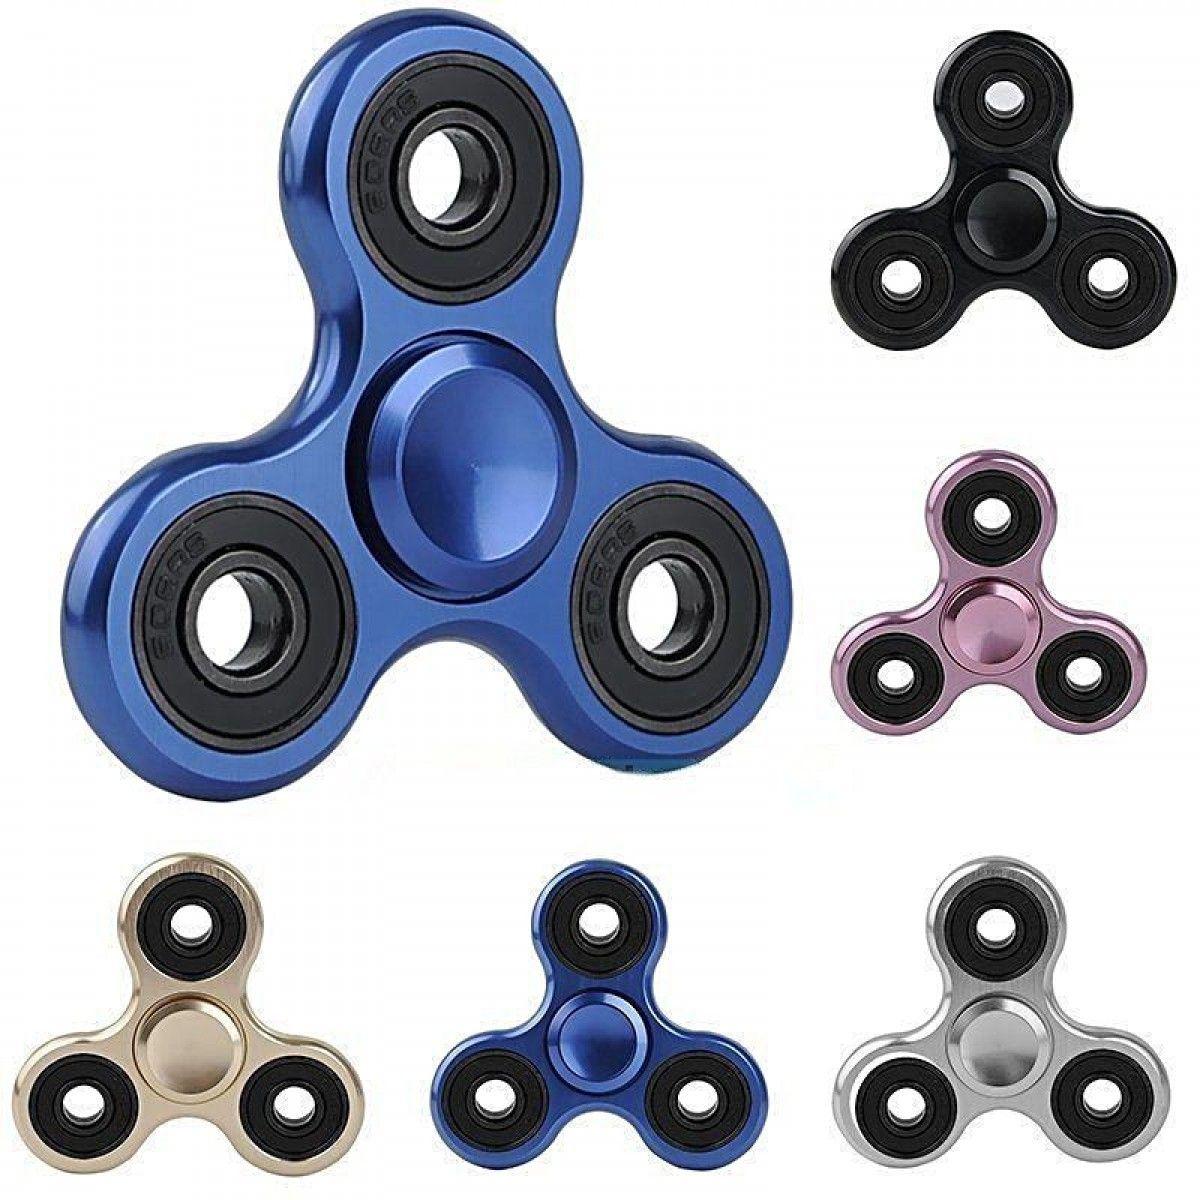 Fidget SpinnerBlue And White Wallpaper